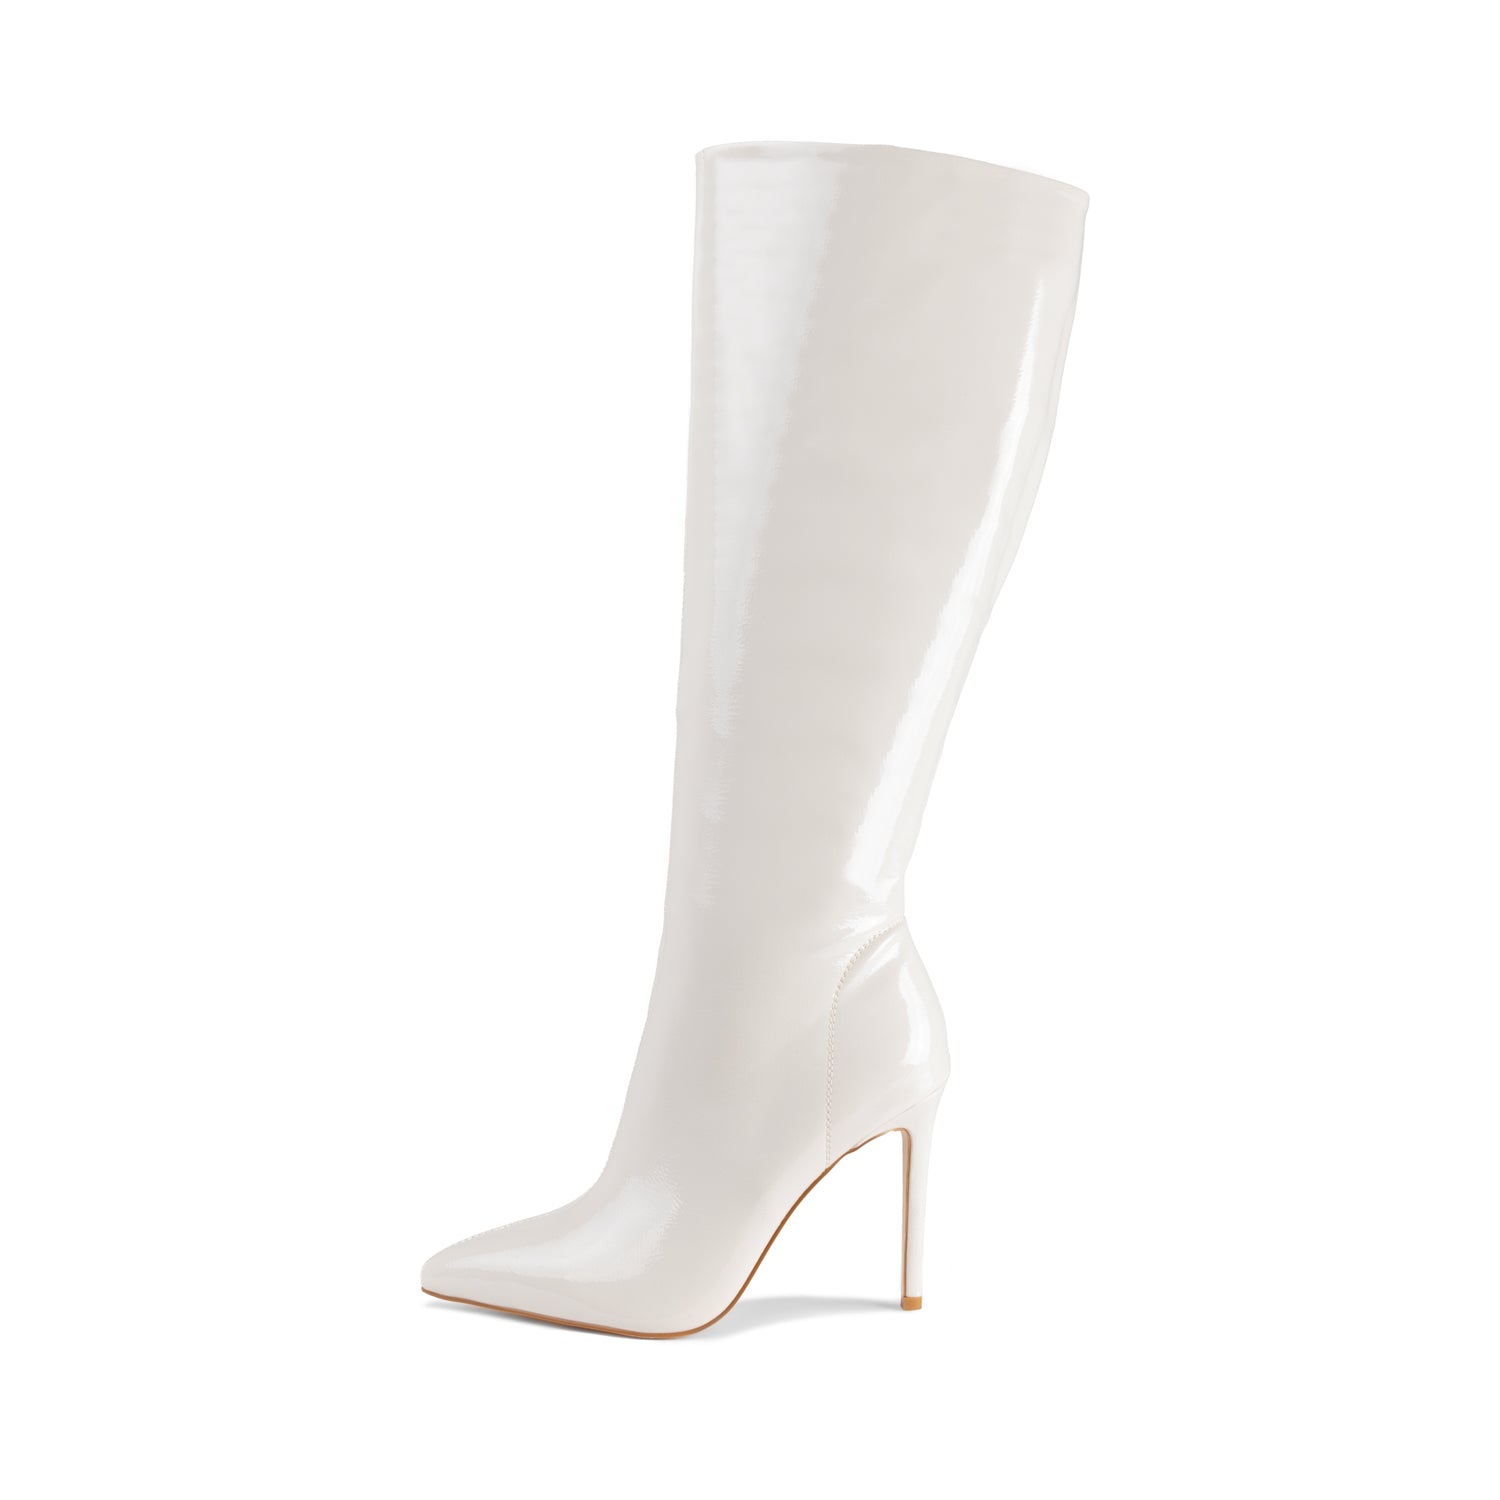 RAID Justin Knee High Boots in Off White